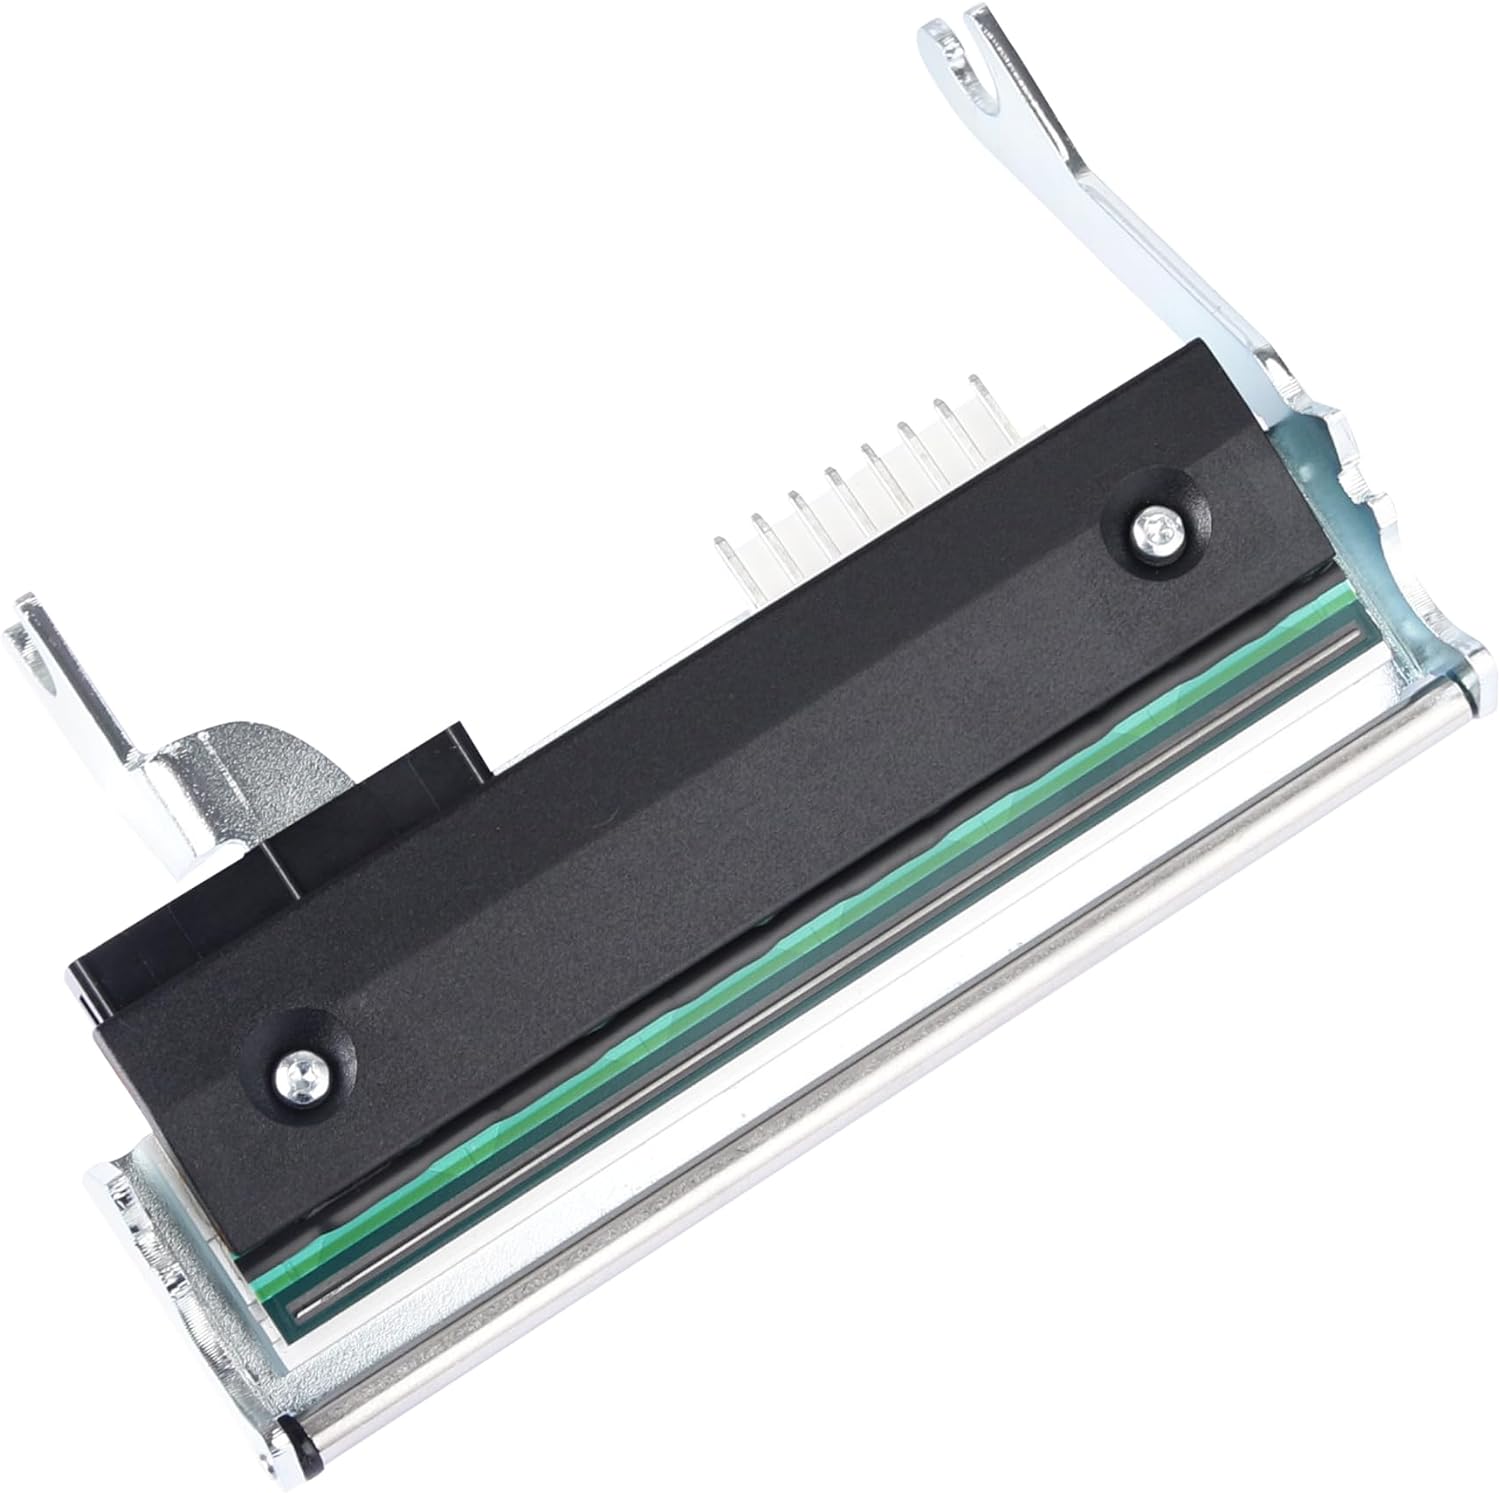 Printhead for Honeywell PM45 203DPI 50180236-001 - Click Image to Close